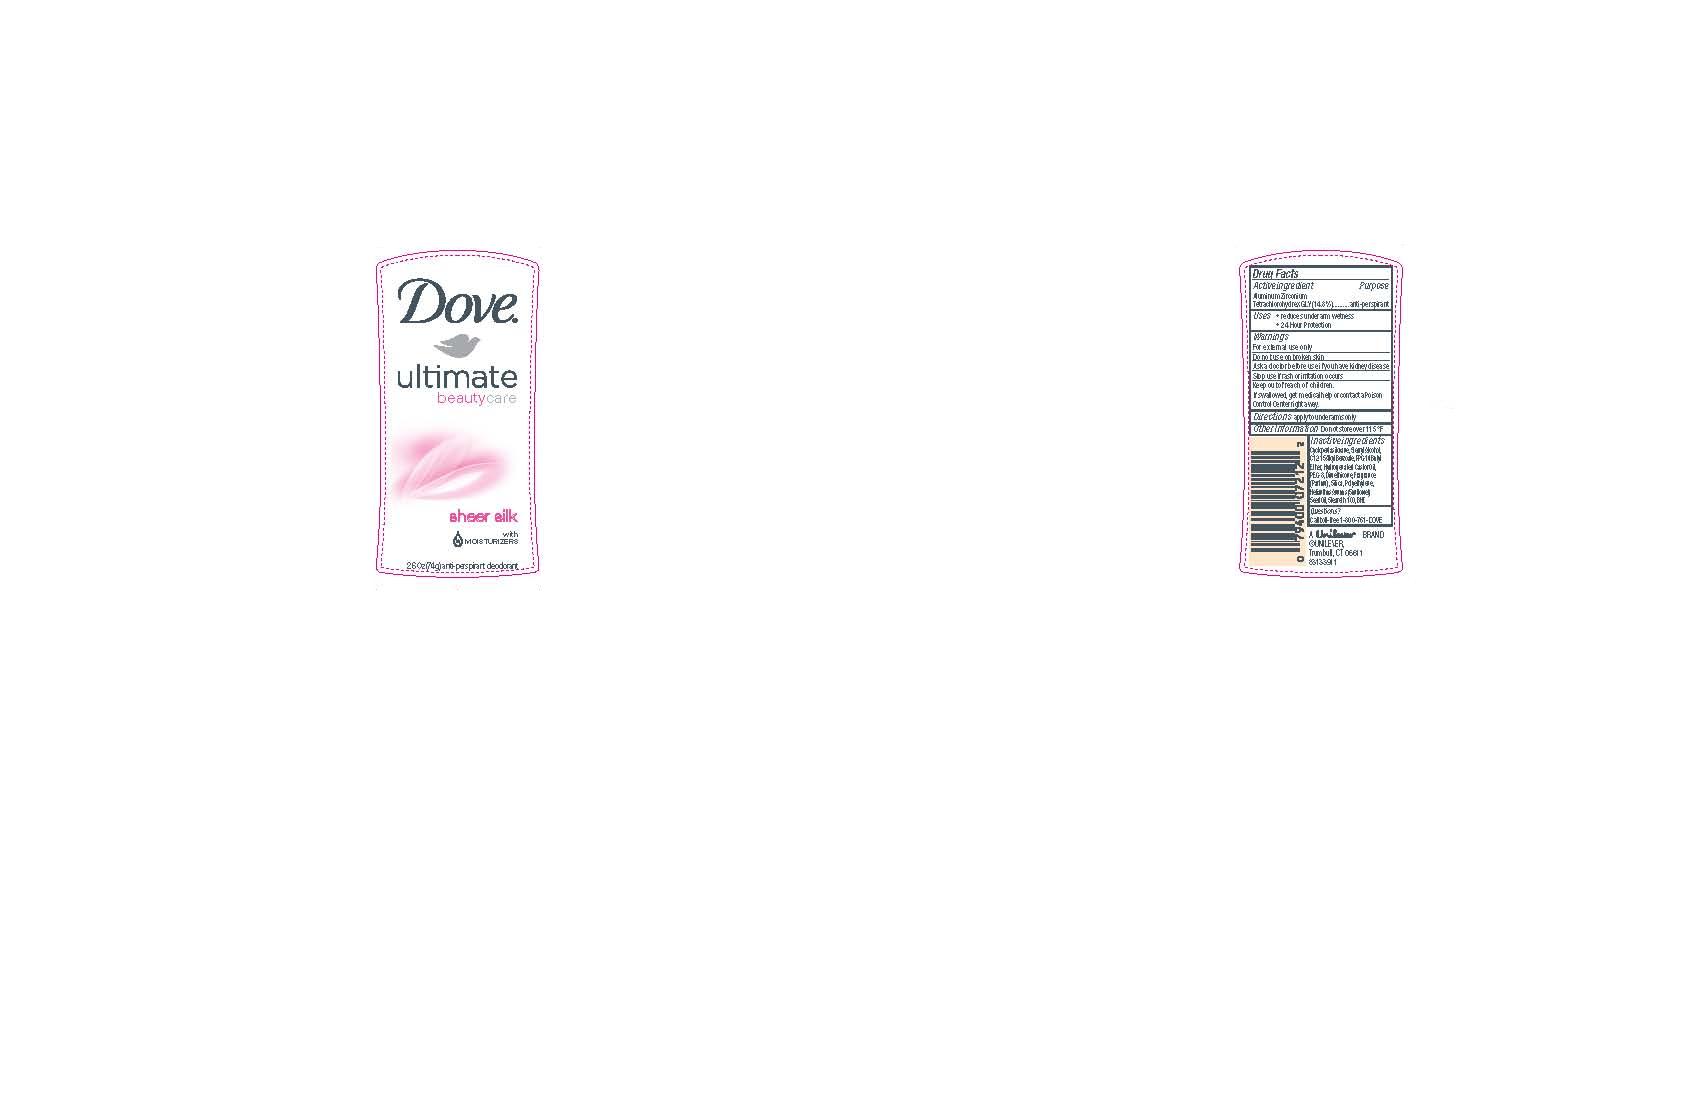 Dove UBC Sheer Silk 2.6 oz front and back PDP